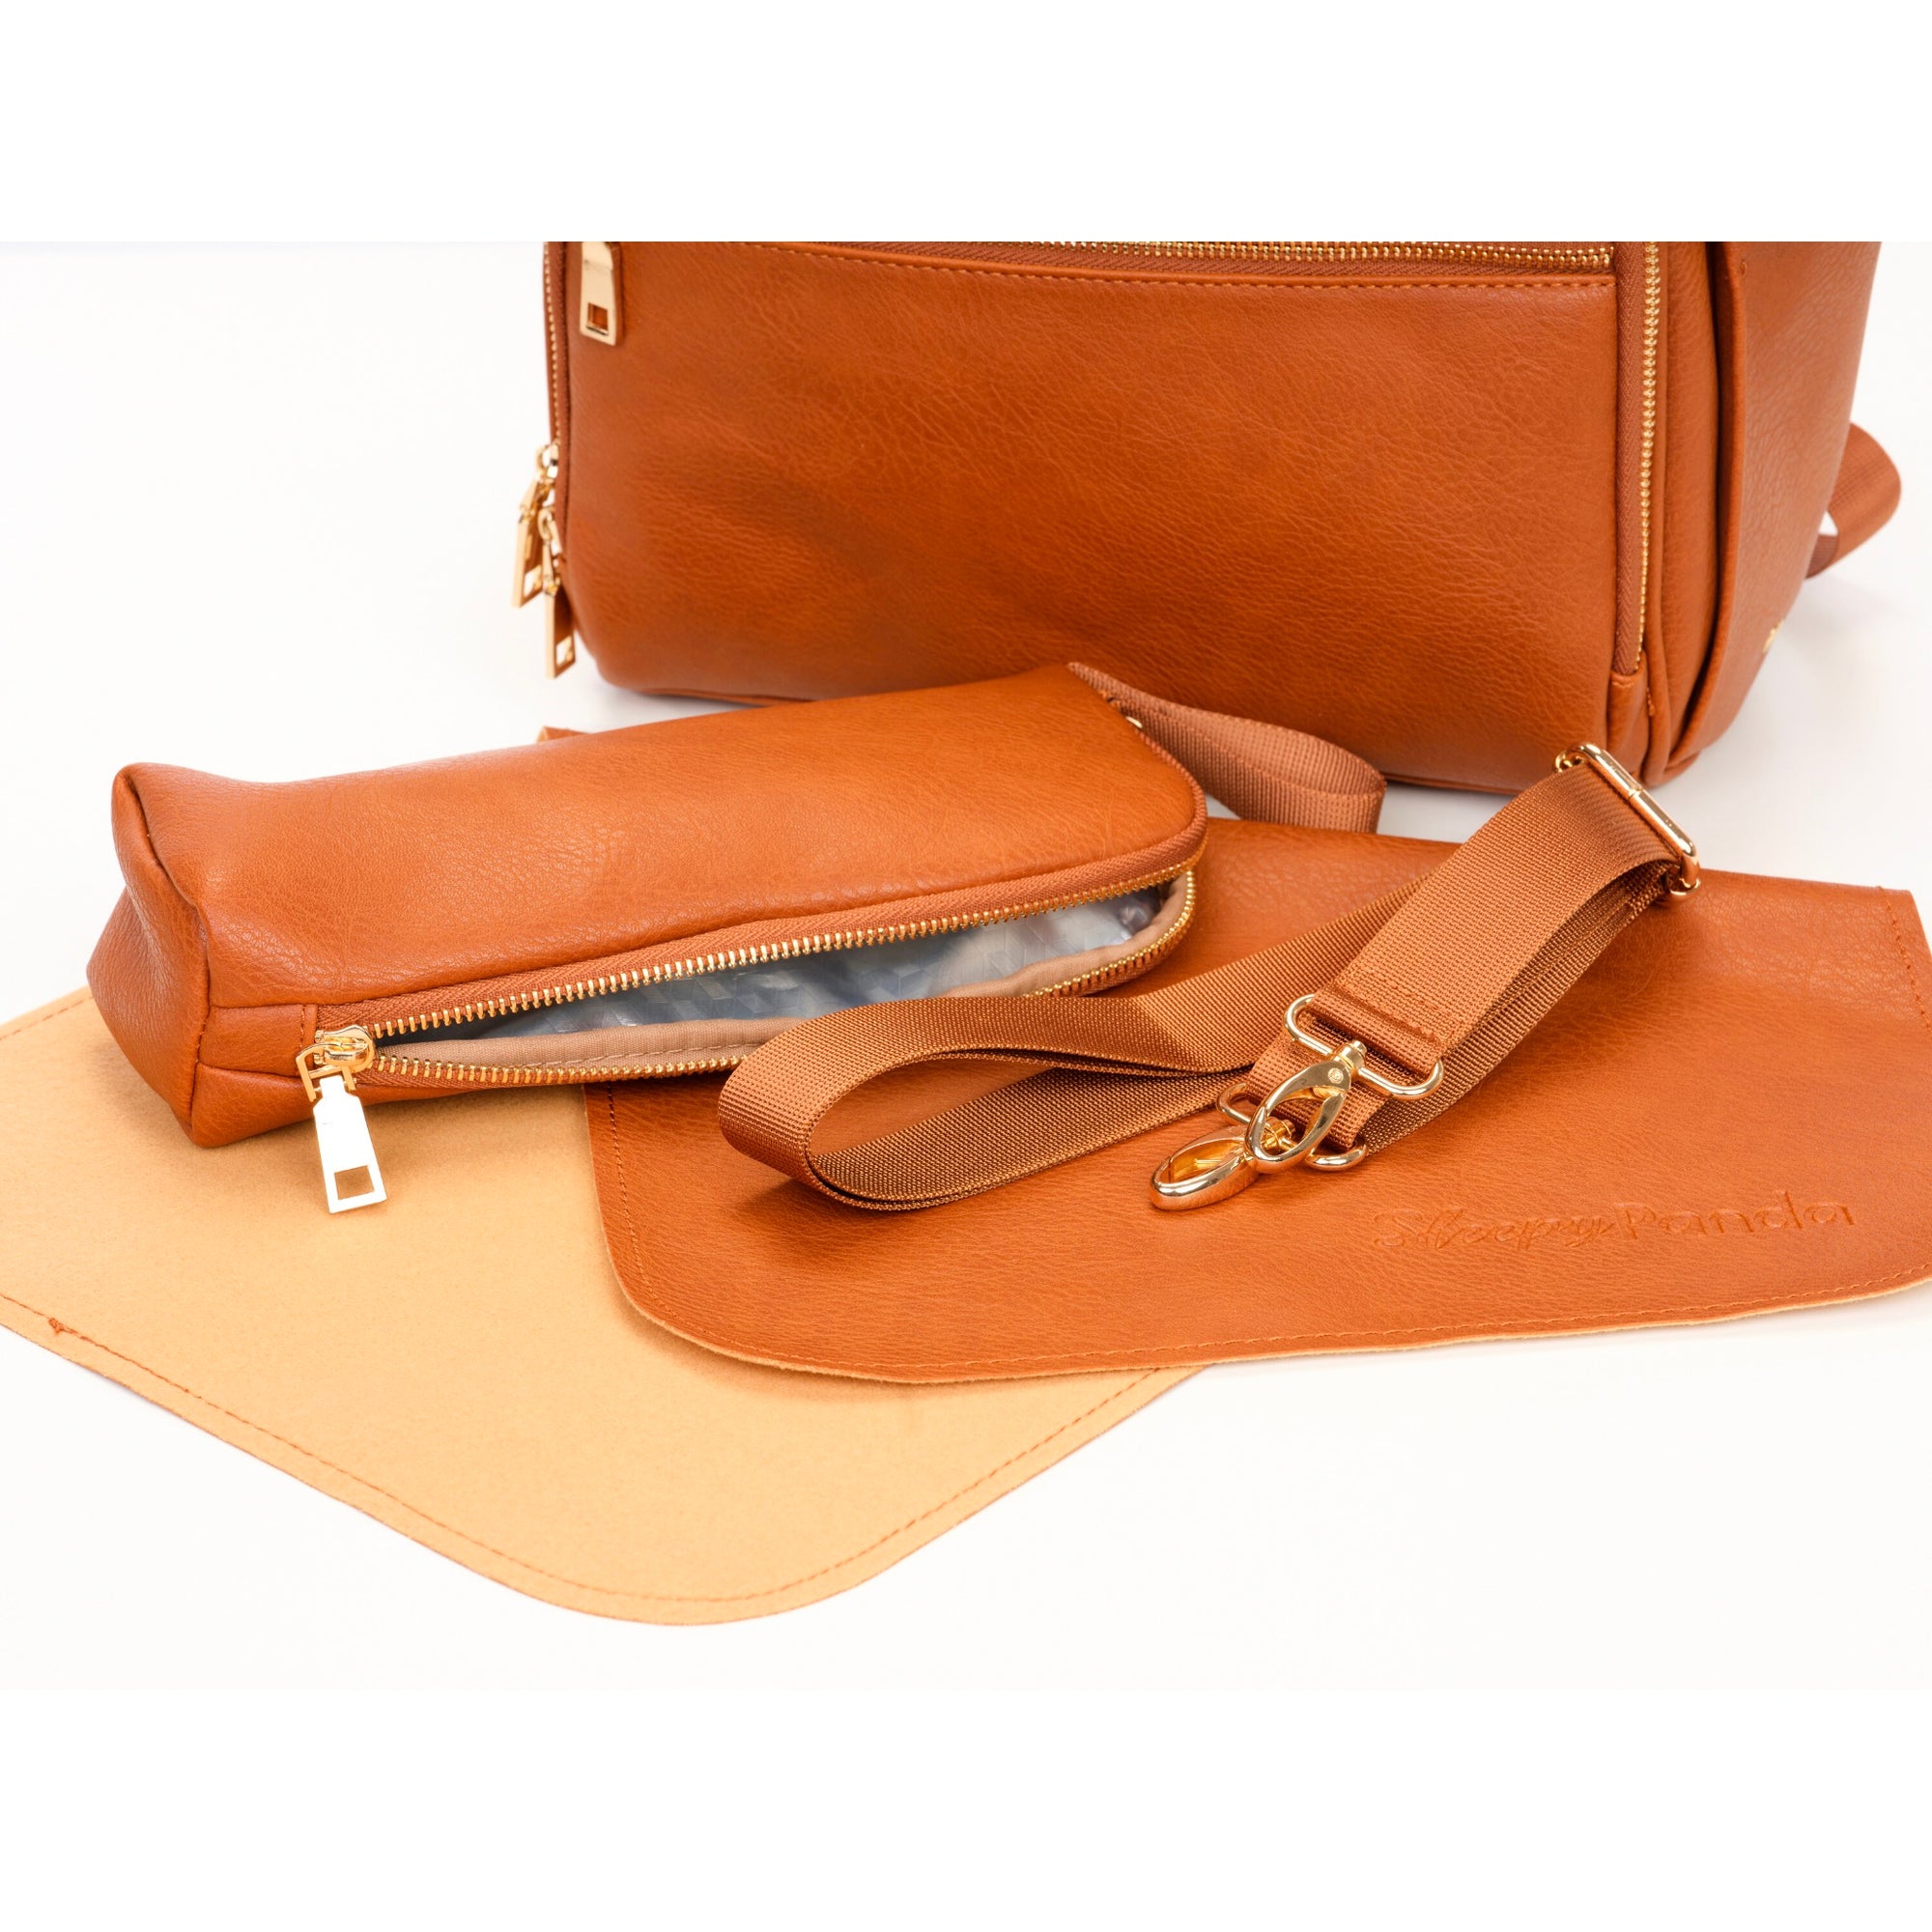 Limited Time: FREE Bailey Bag 4-Piece Accessory Pack Chestnut (Valued at $80)